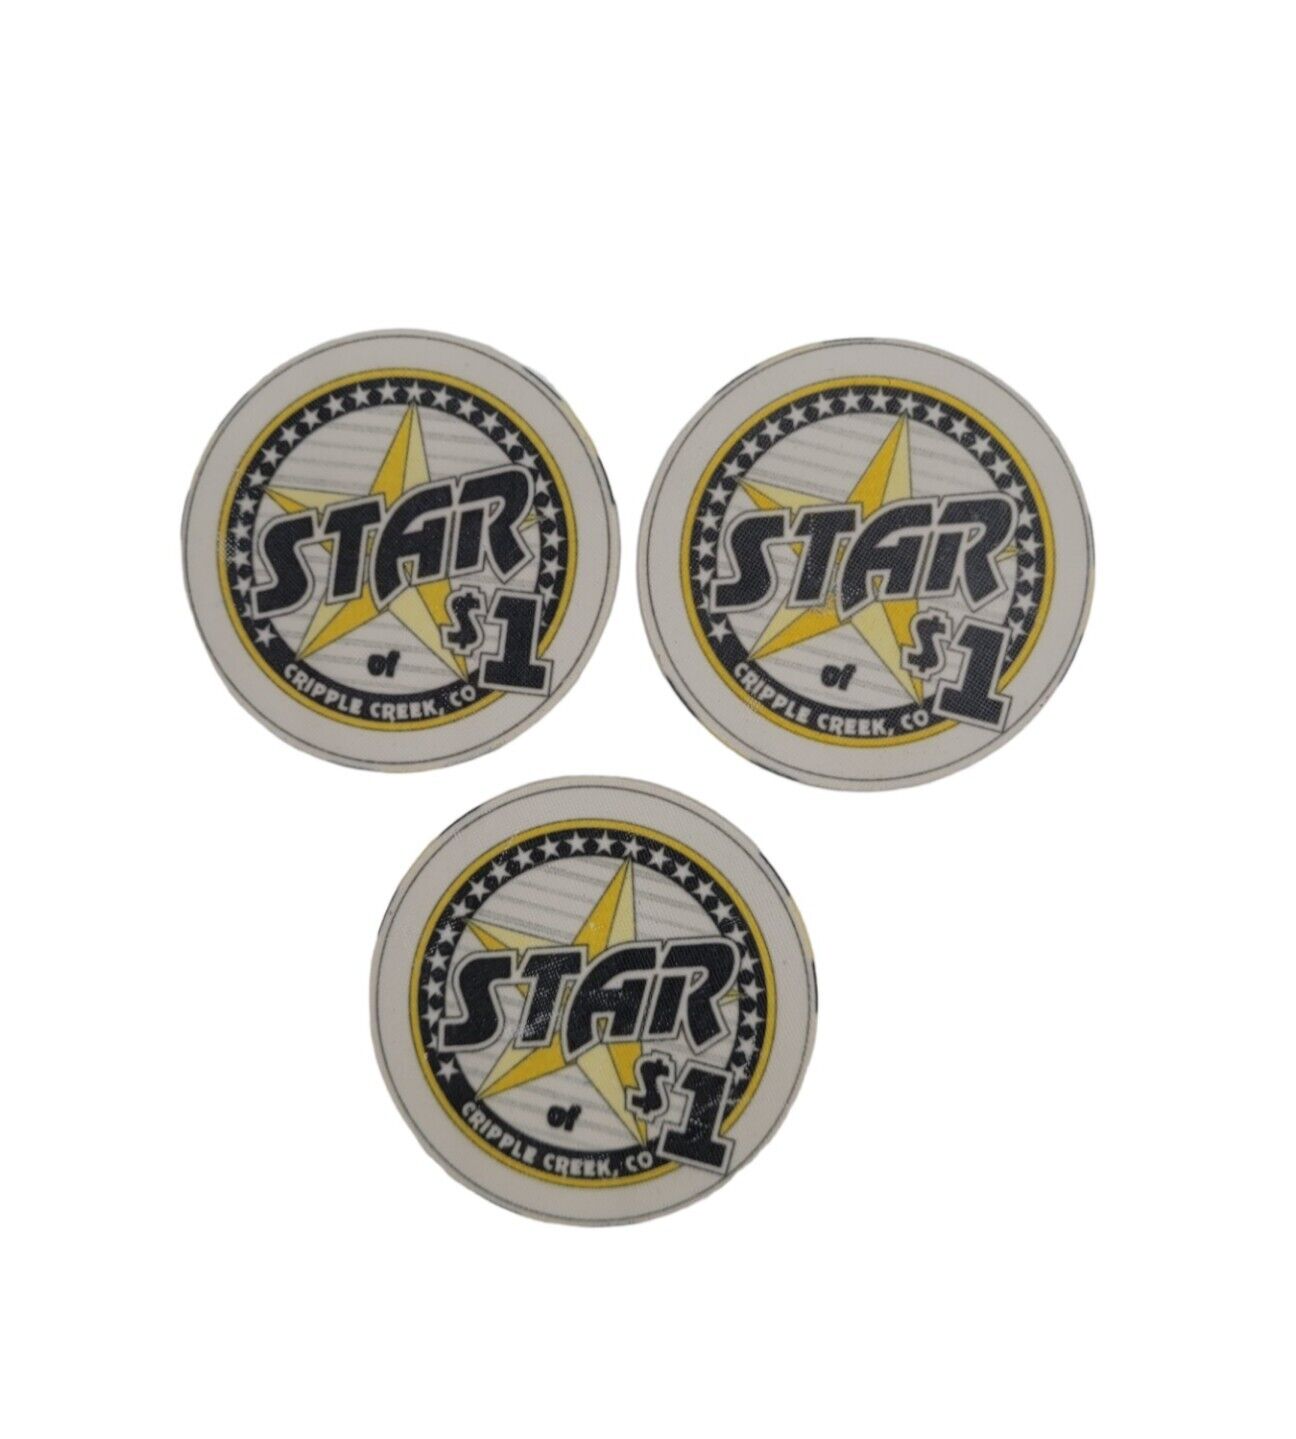 Star Casino $1 Chips Cripple Creek CO Lot Of 3 Hard To Find Obsolete